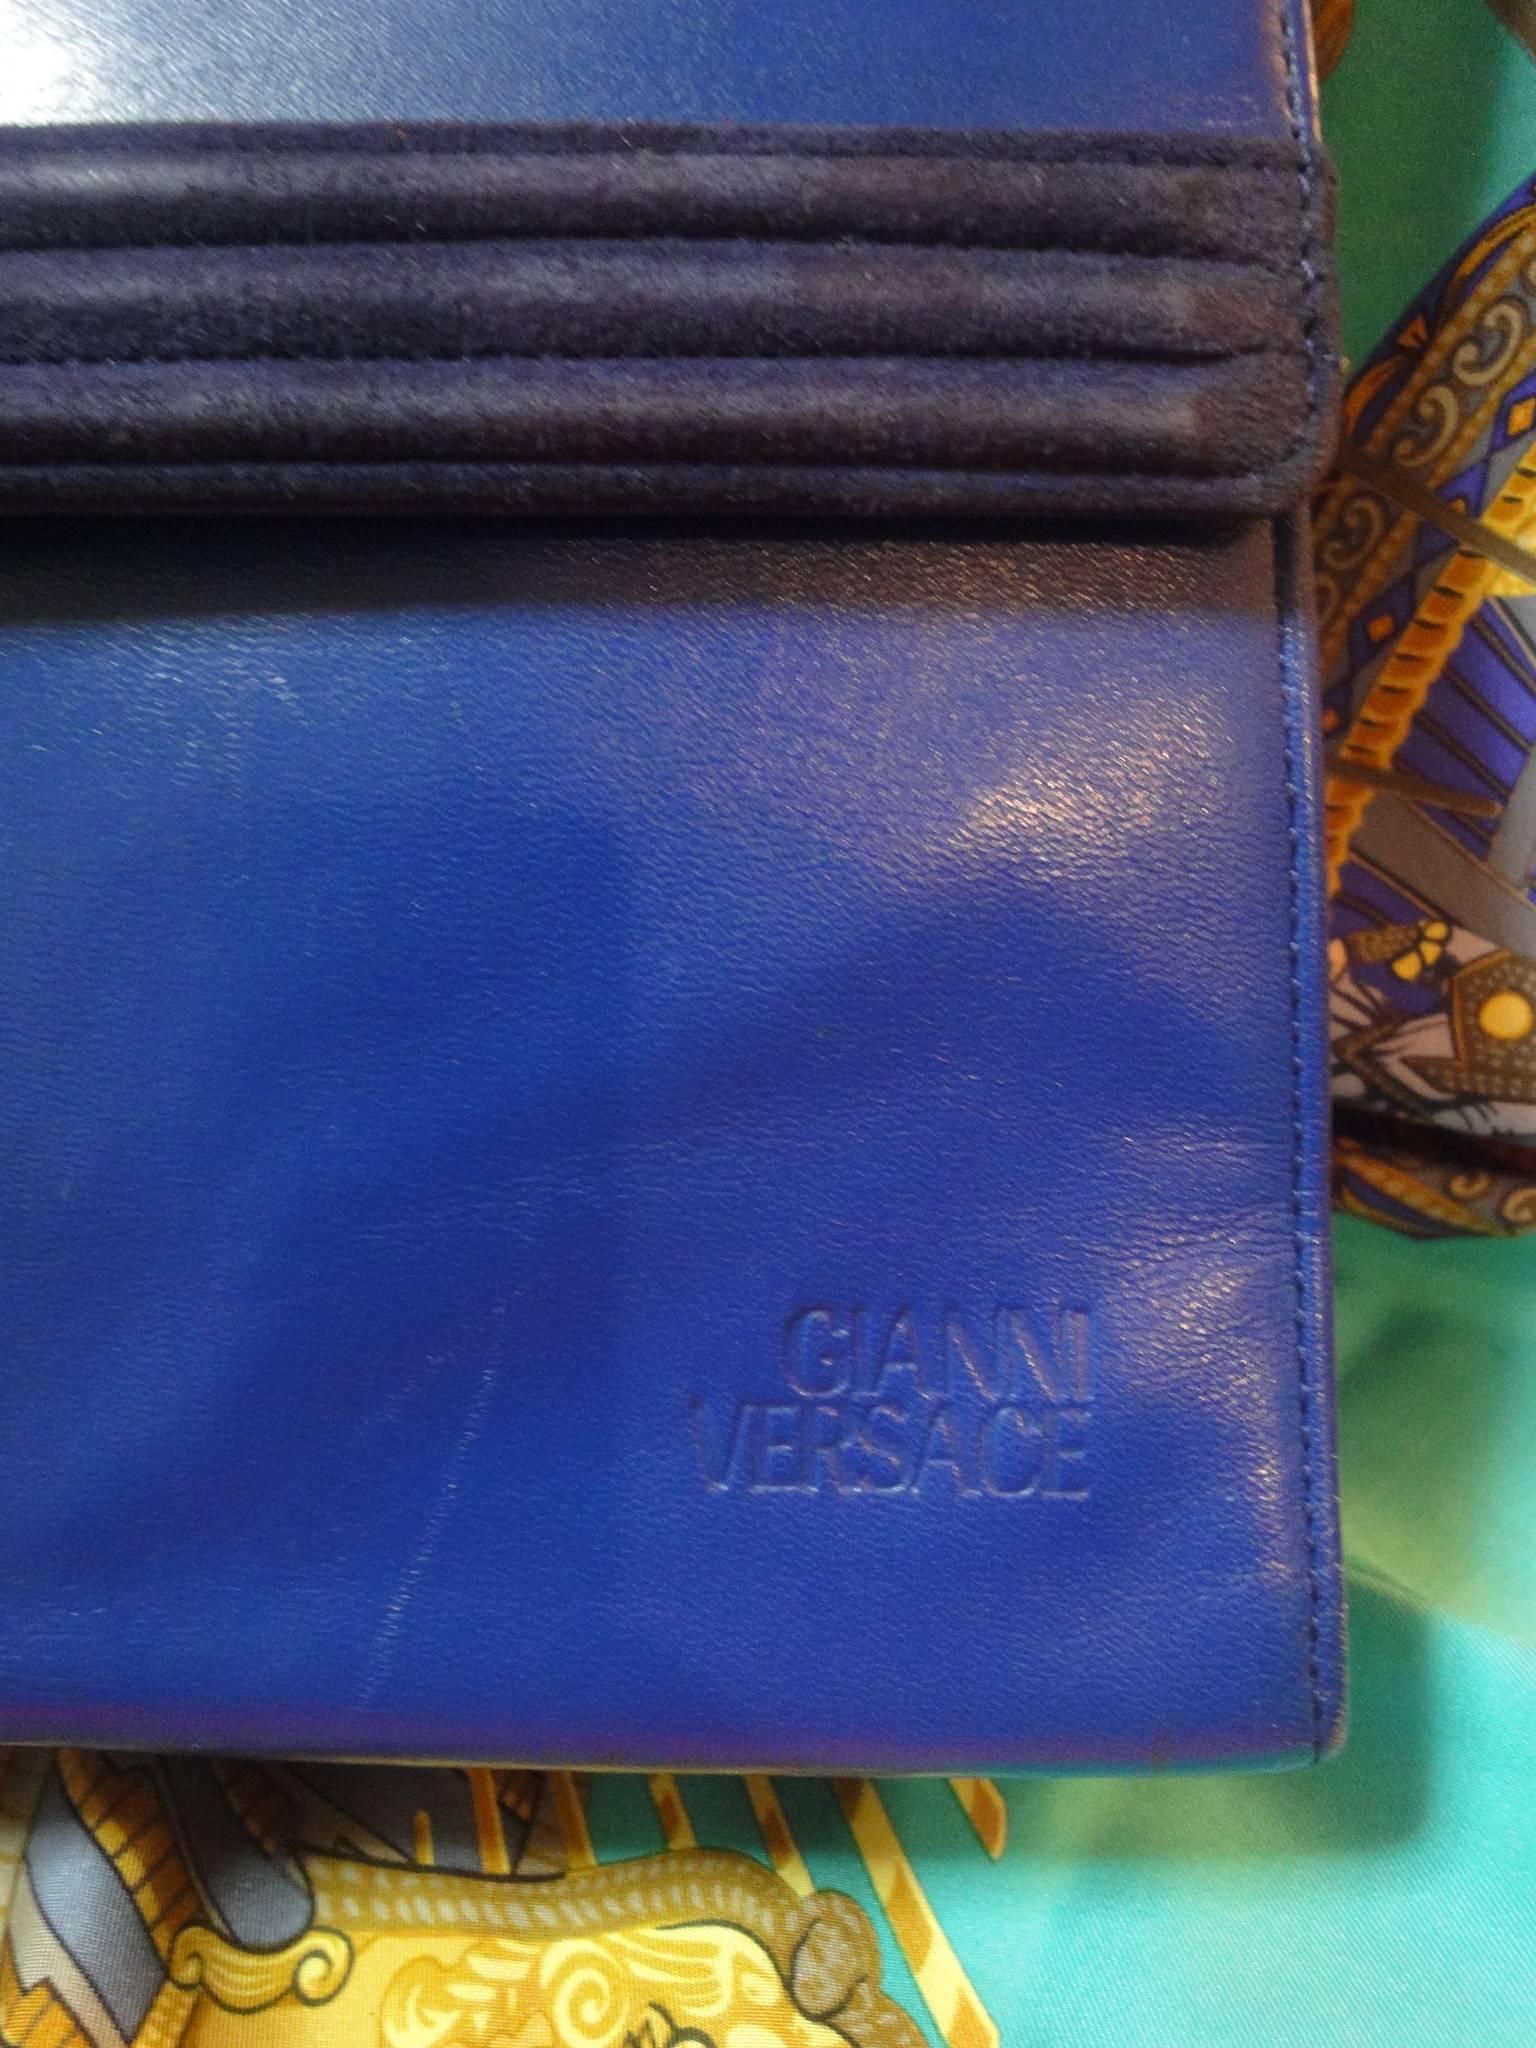 Women's Vintage Gianni Versace blue smooth and suede leather handbag purse with a bow. 